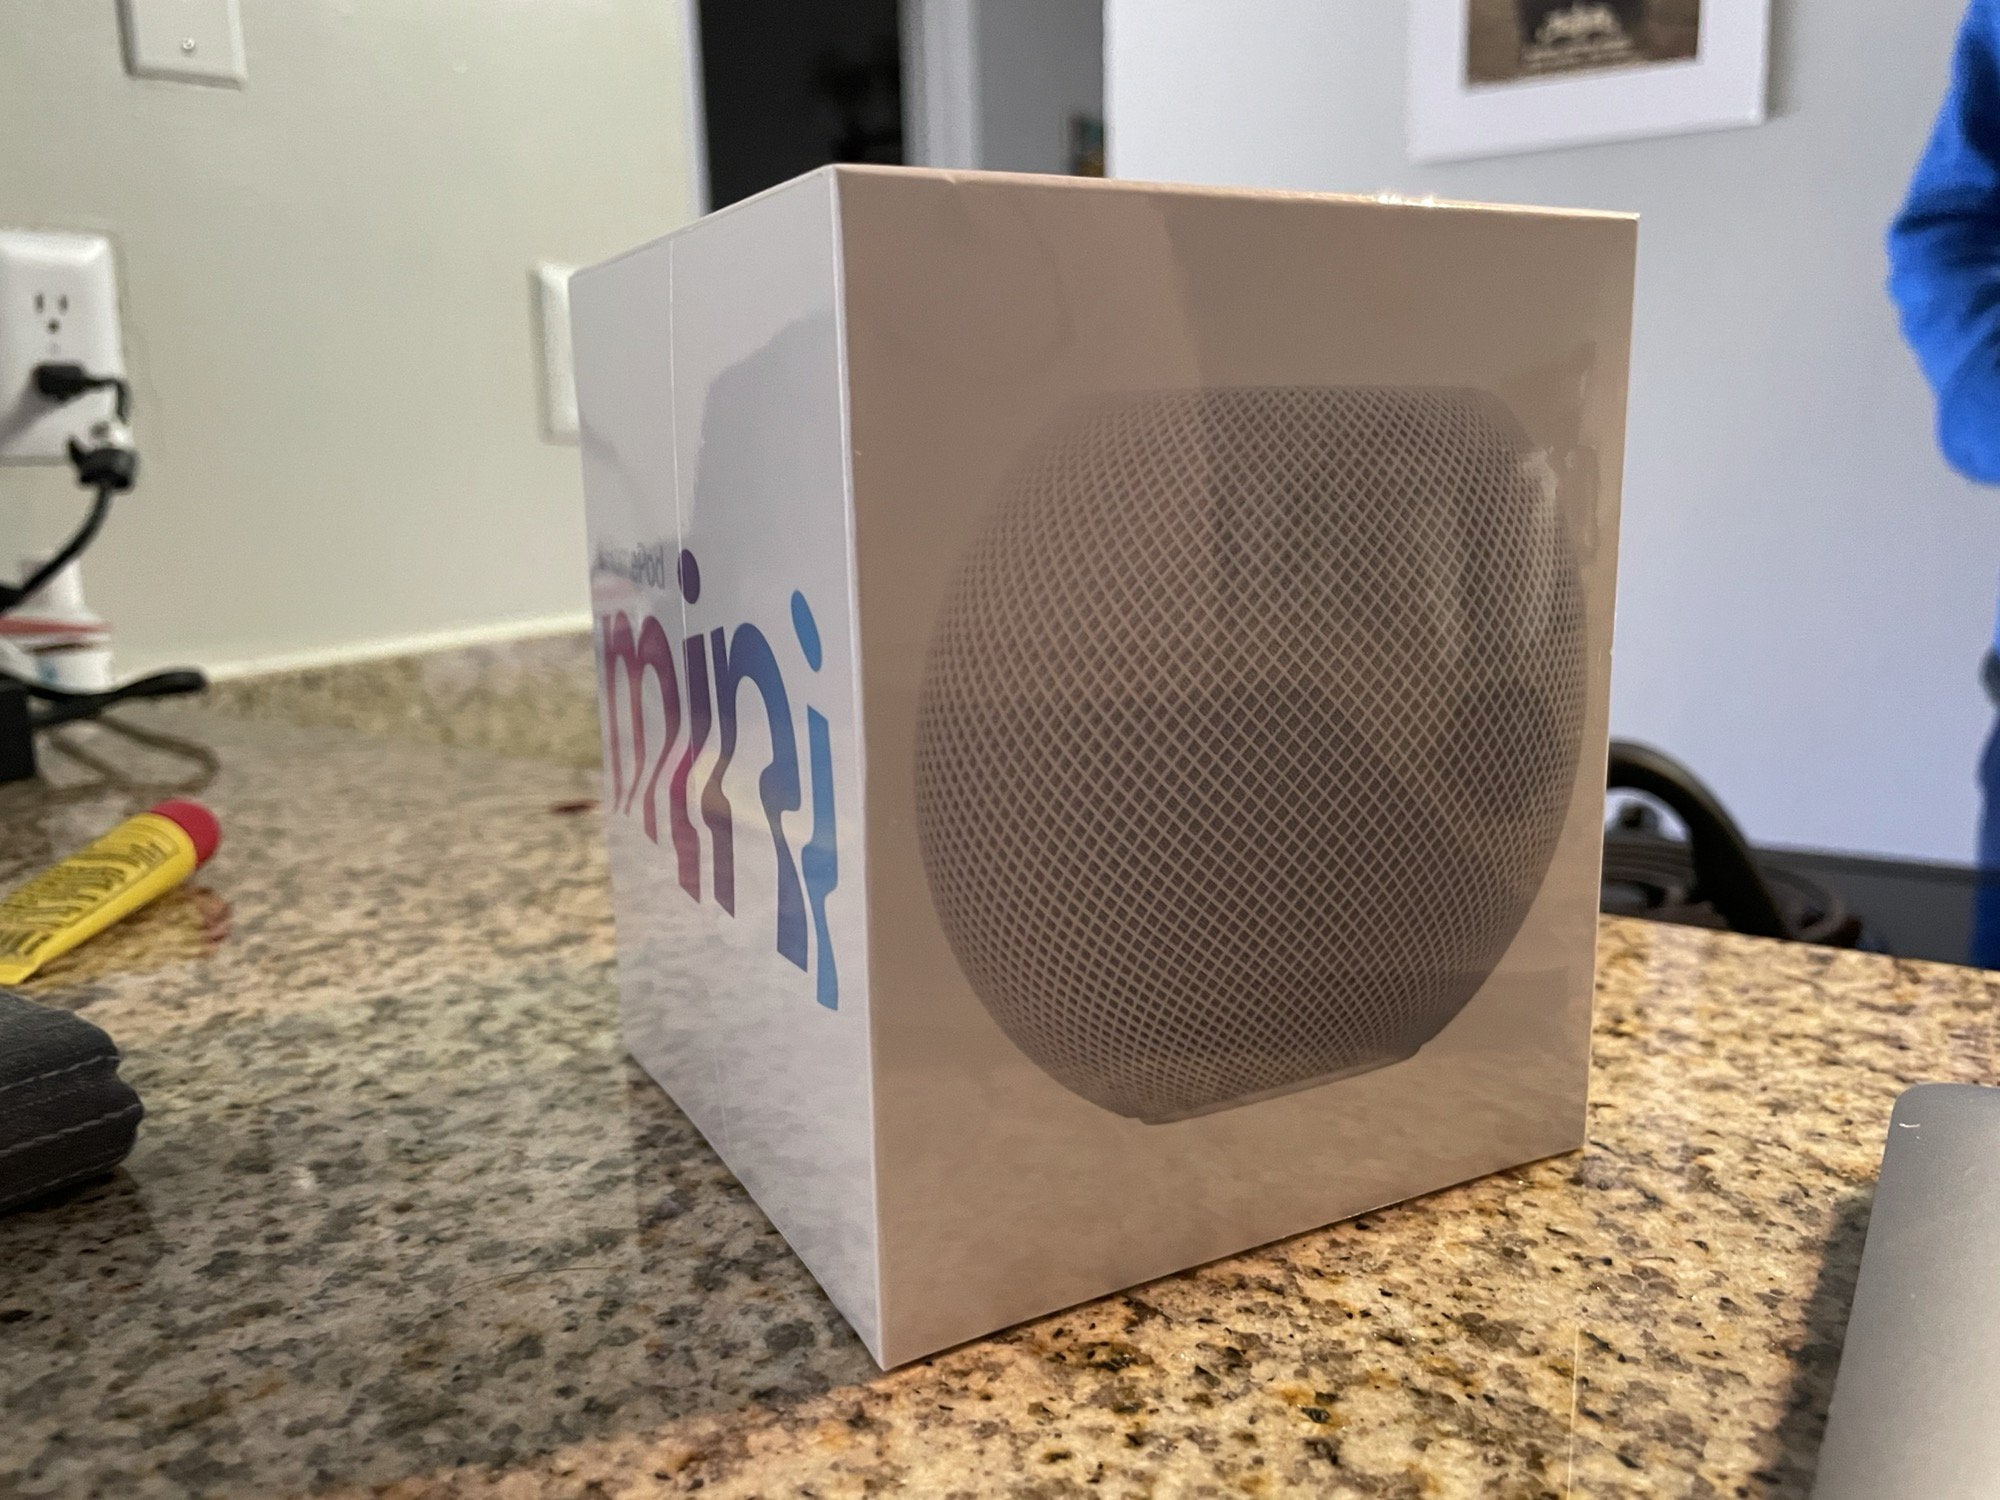 Excited to fill a few HomePod goals